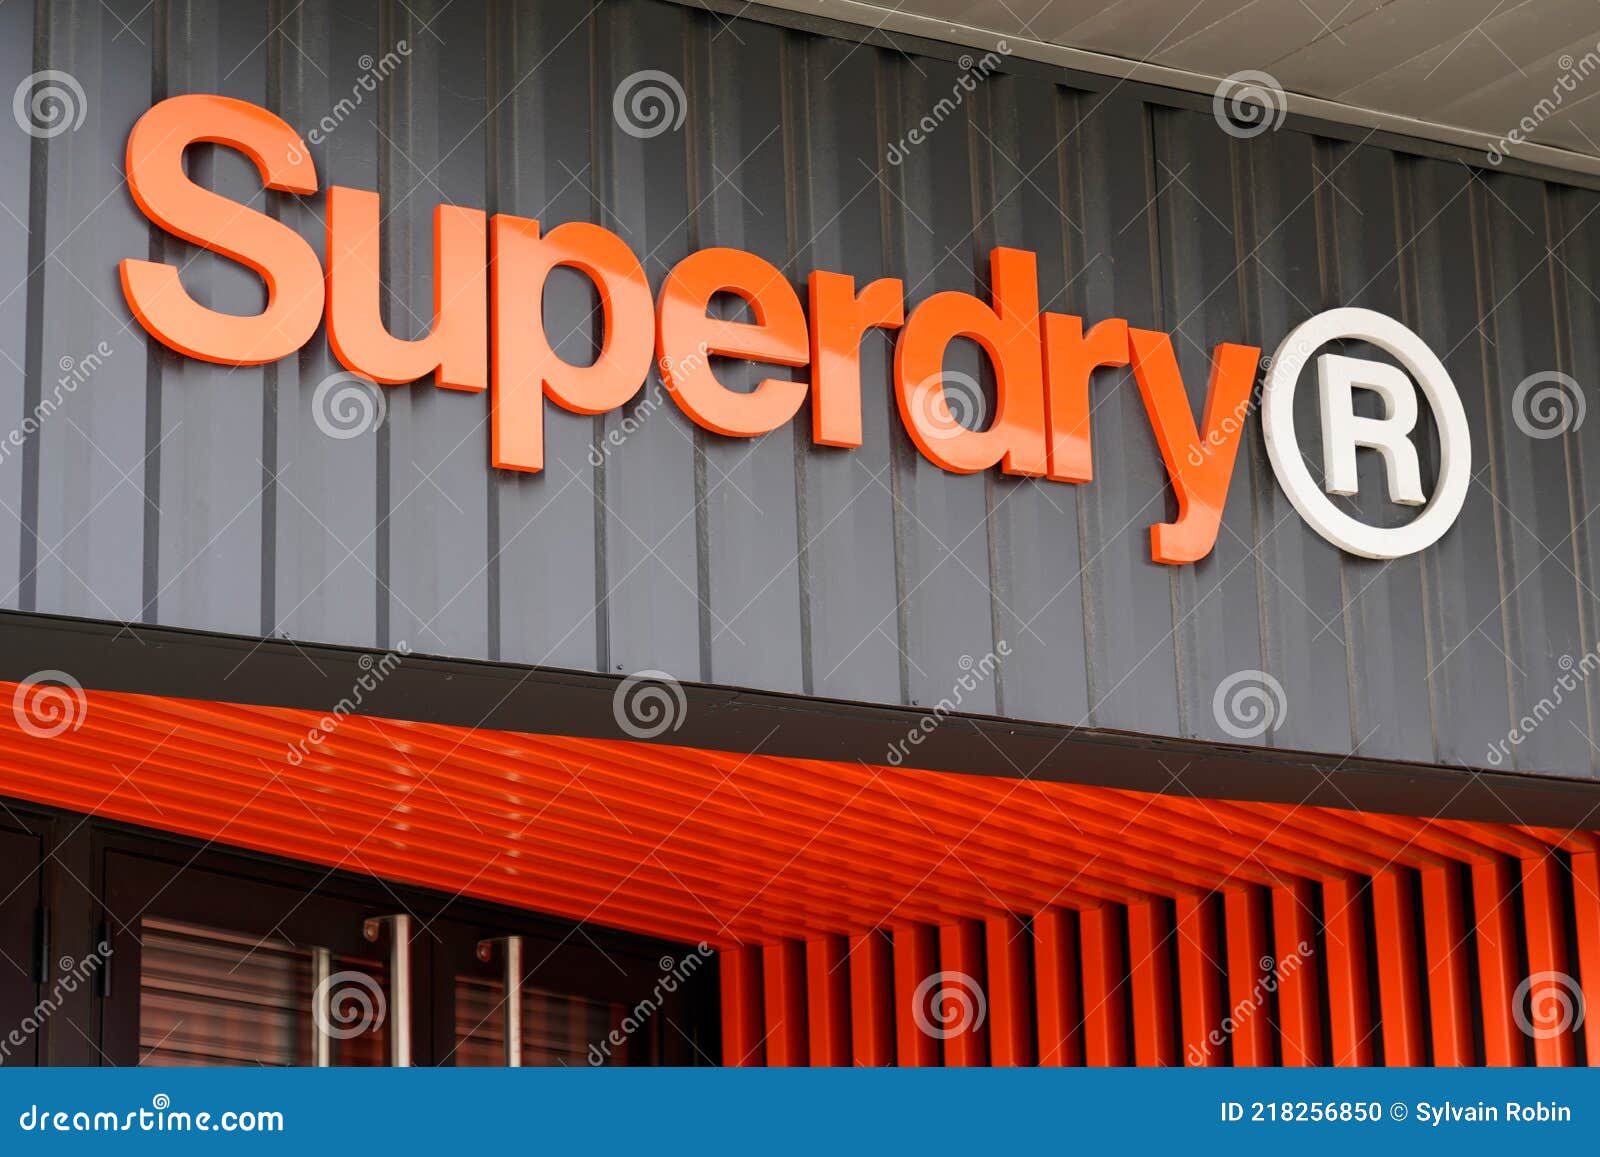 Superdry Logo Brand and Orange Sign Text for Store of British